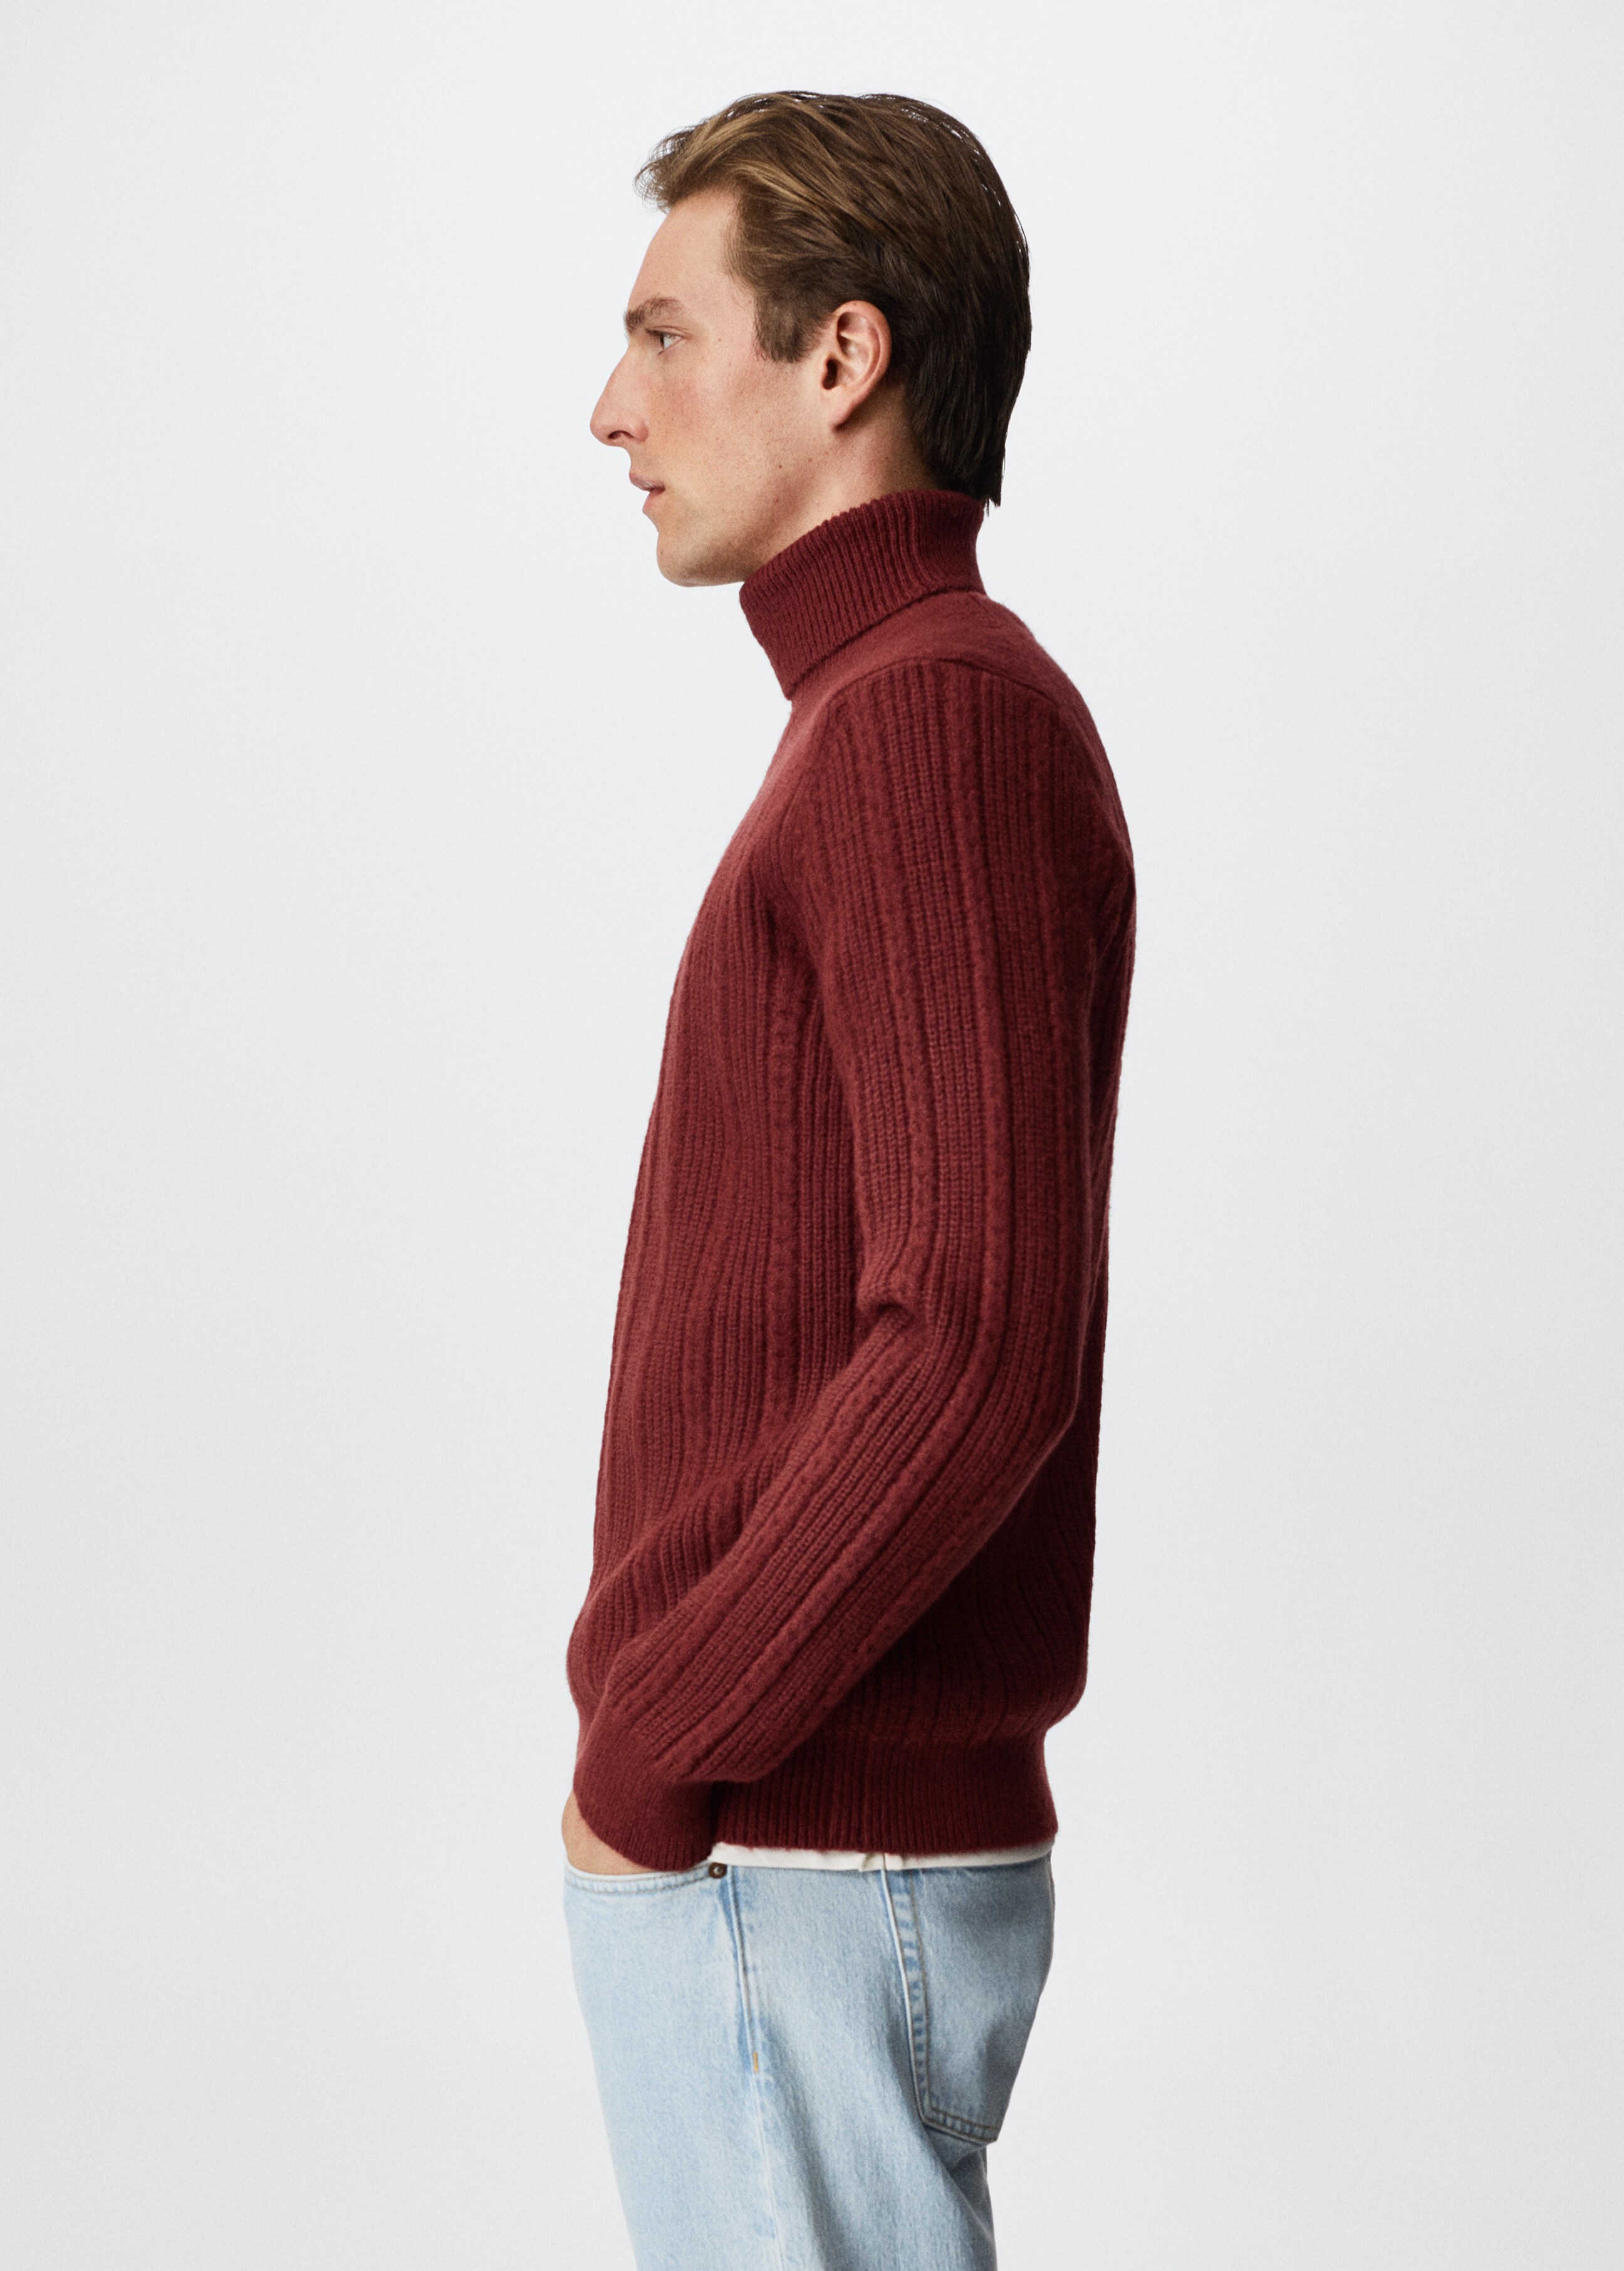 Structured turtleneck sweater - Details of the article 2